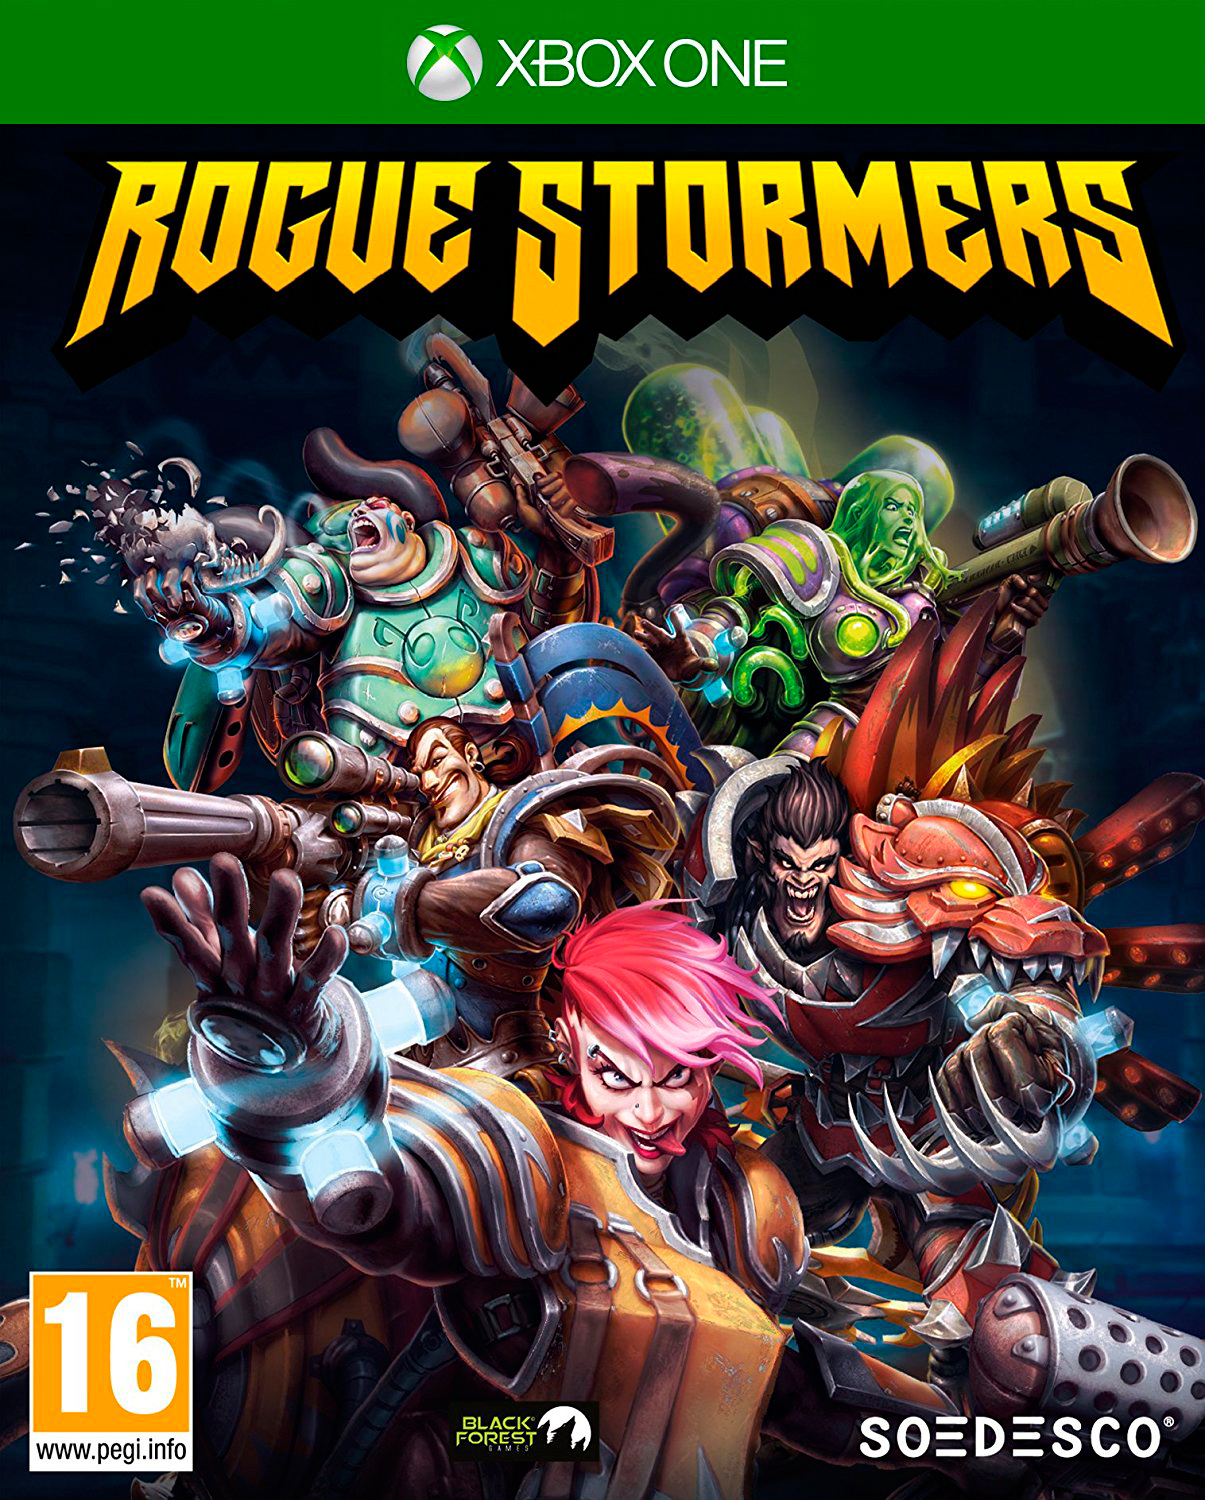 Rogue Stormers (Xbox One), Black Forest Games